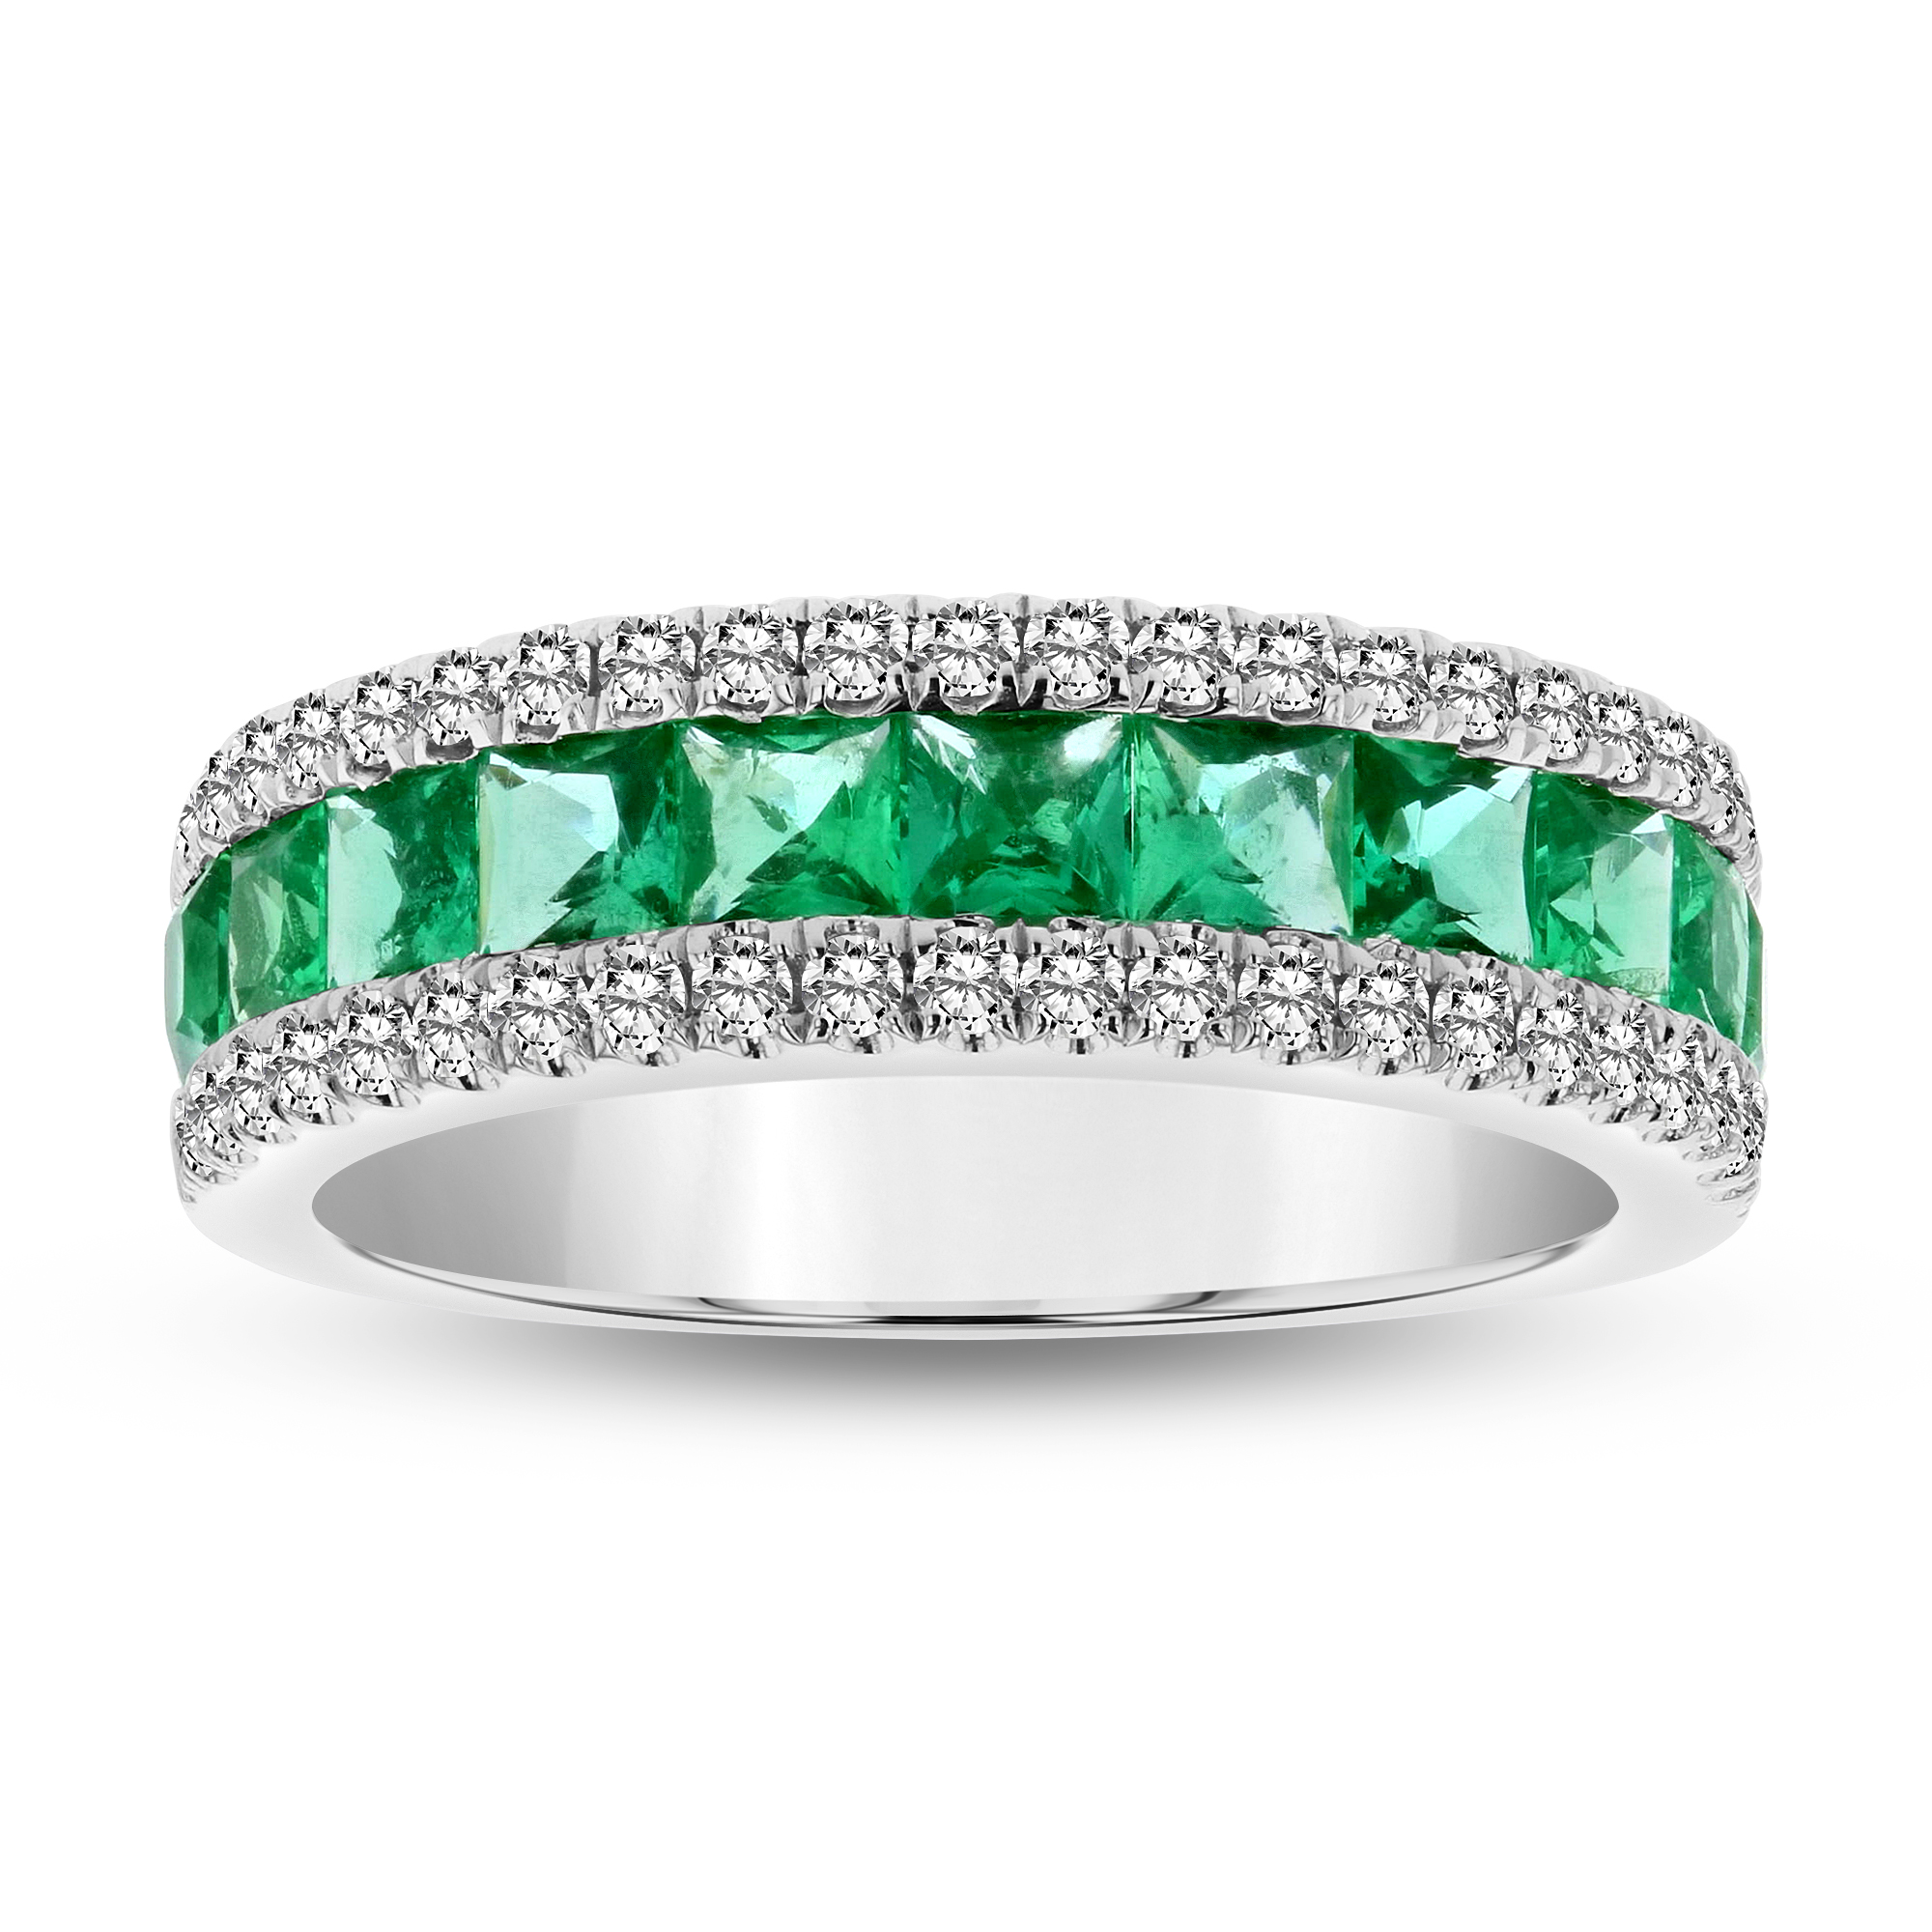 1.56ctw Diamond and Emerald Ring in 18k White Gold